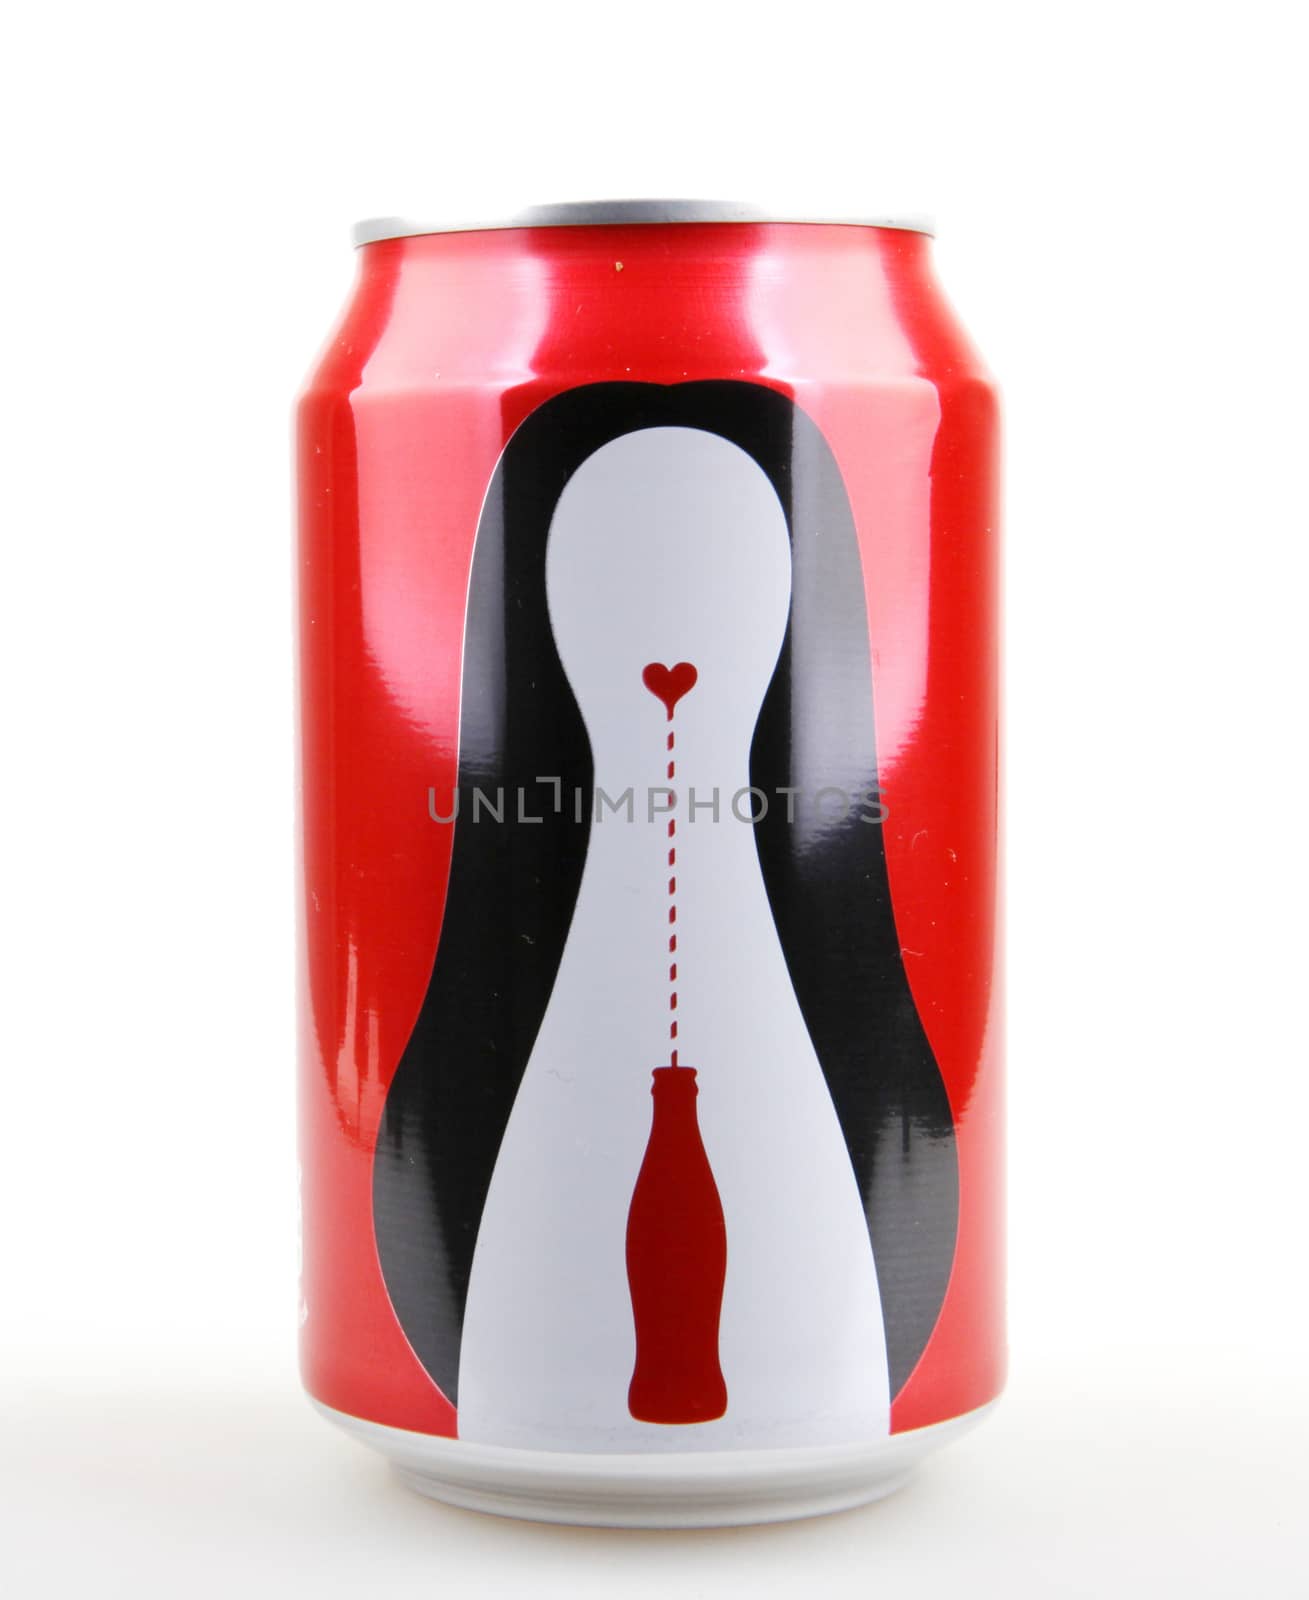 AYTOS, BULGARIA - OCTOBER 04, 2015: Coca-Cola isolated on white background. Coca-Cola is a carbonated soft drink sold in stores, restaurants, and vending machines throughout the world. by nenov